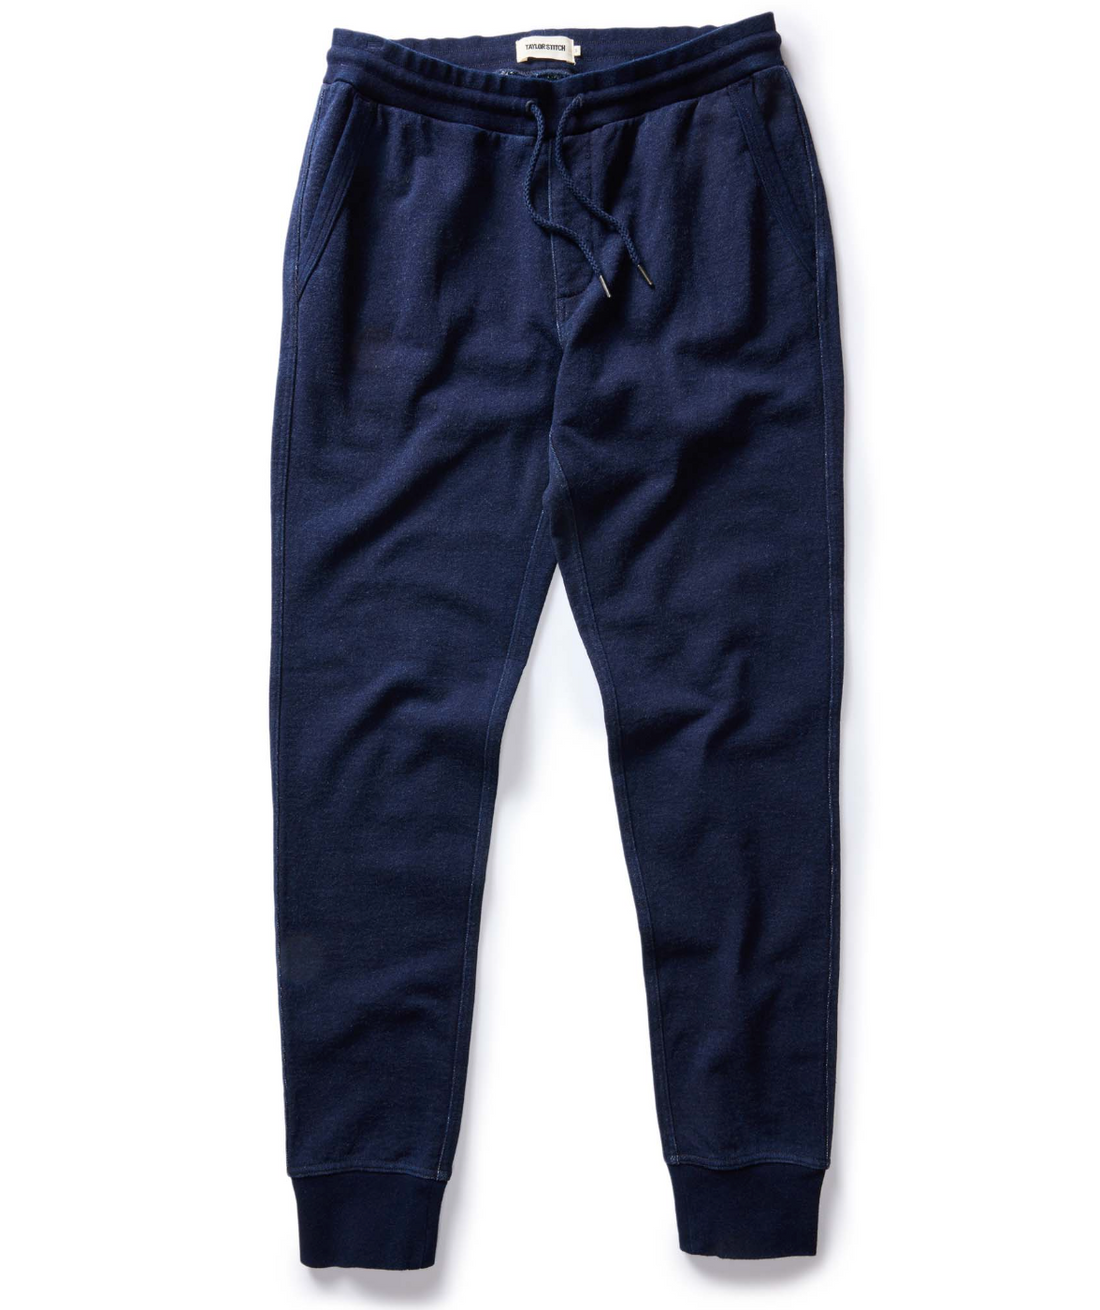 Taylor Stitch - The Sunset Pant in Indigo Terry